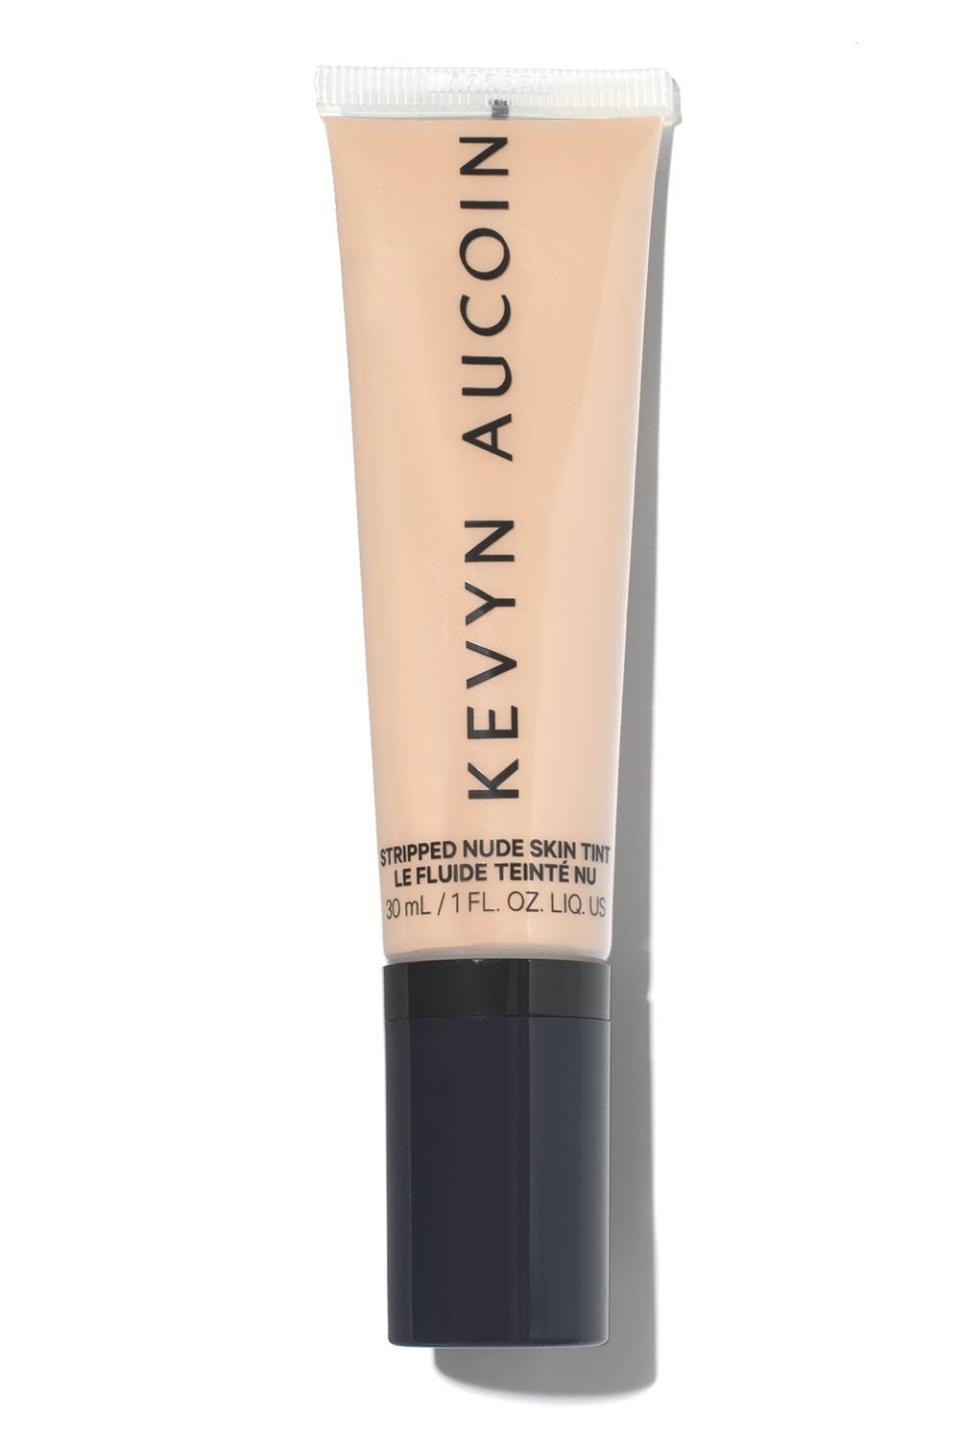 3) Kevyn Aucoin Stripped Nude Skin Tint